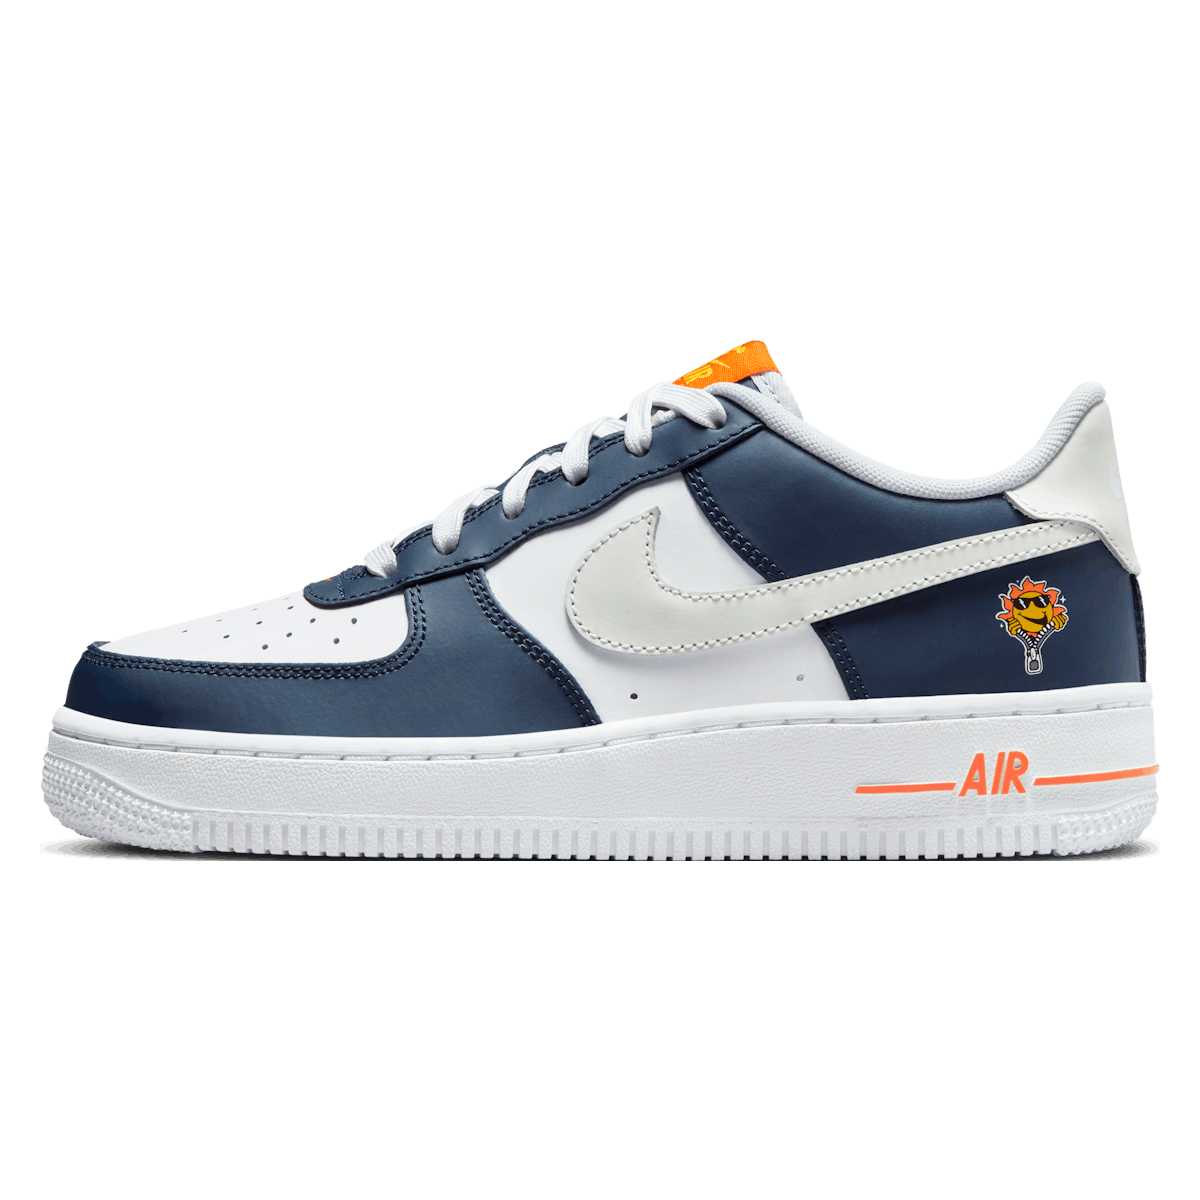 Nike Air Force 1 LV8 GS "White Midnight Navy"